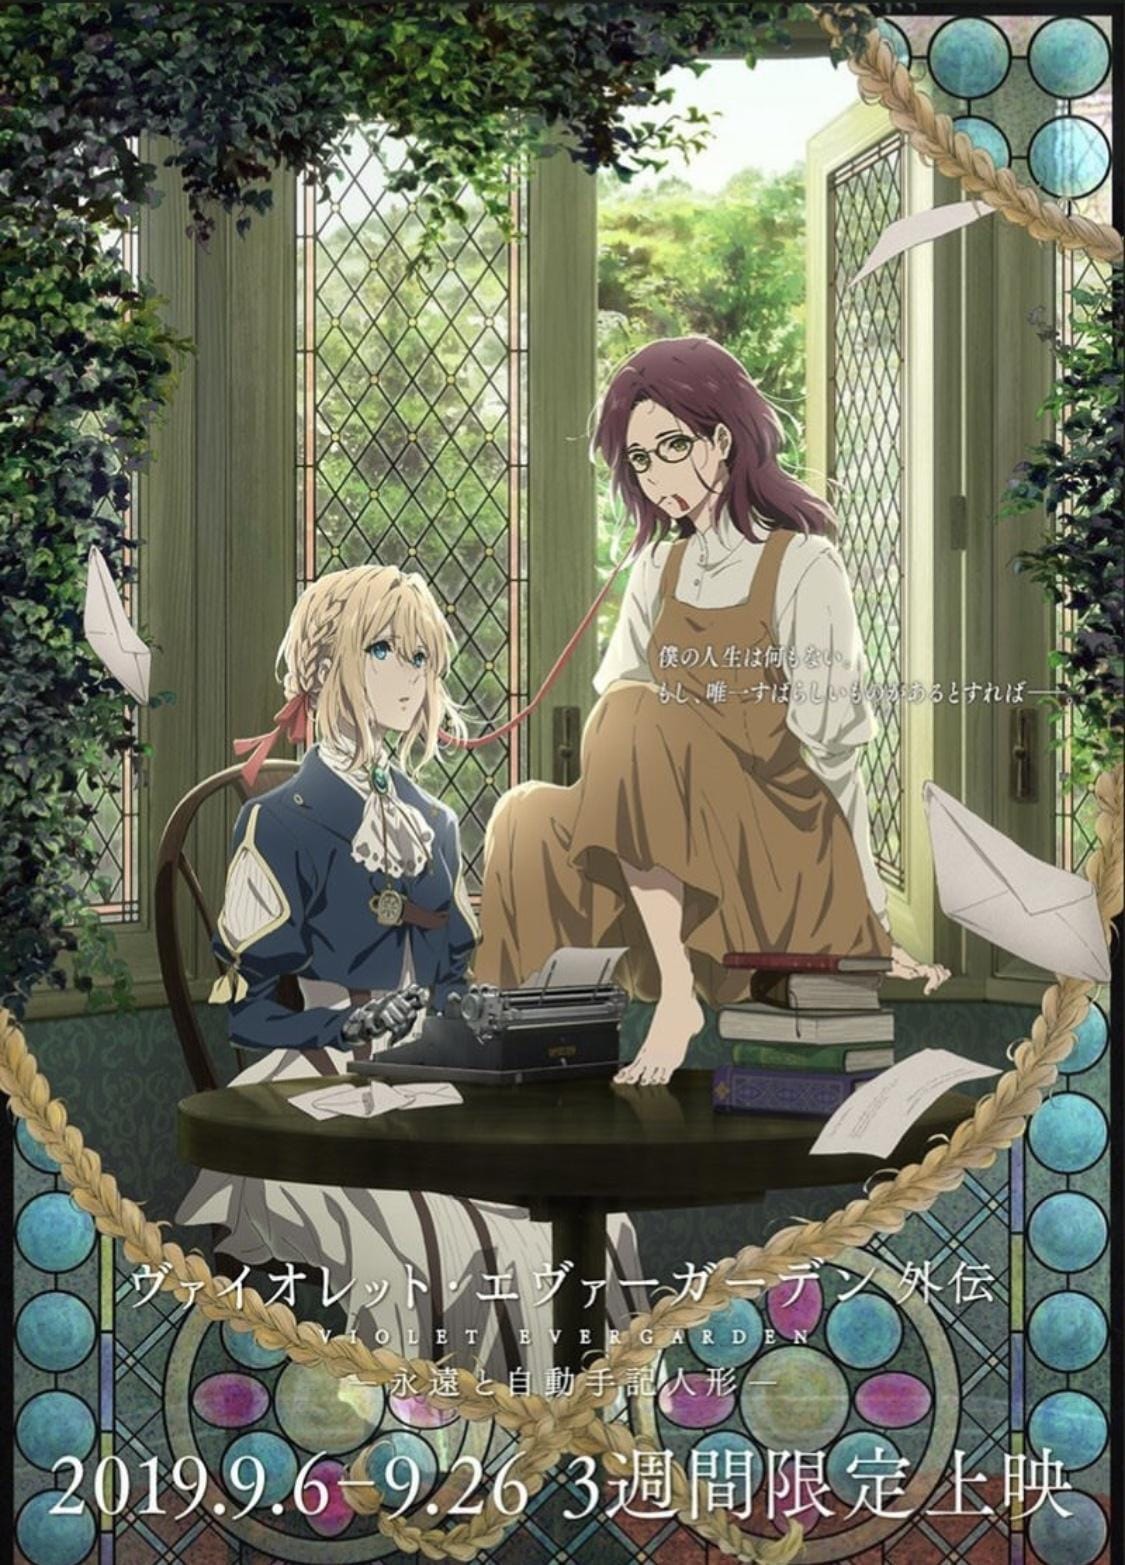 download violet evergarden violet evergarden eternity and the auto memory doll for free